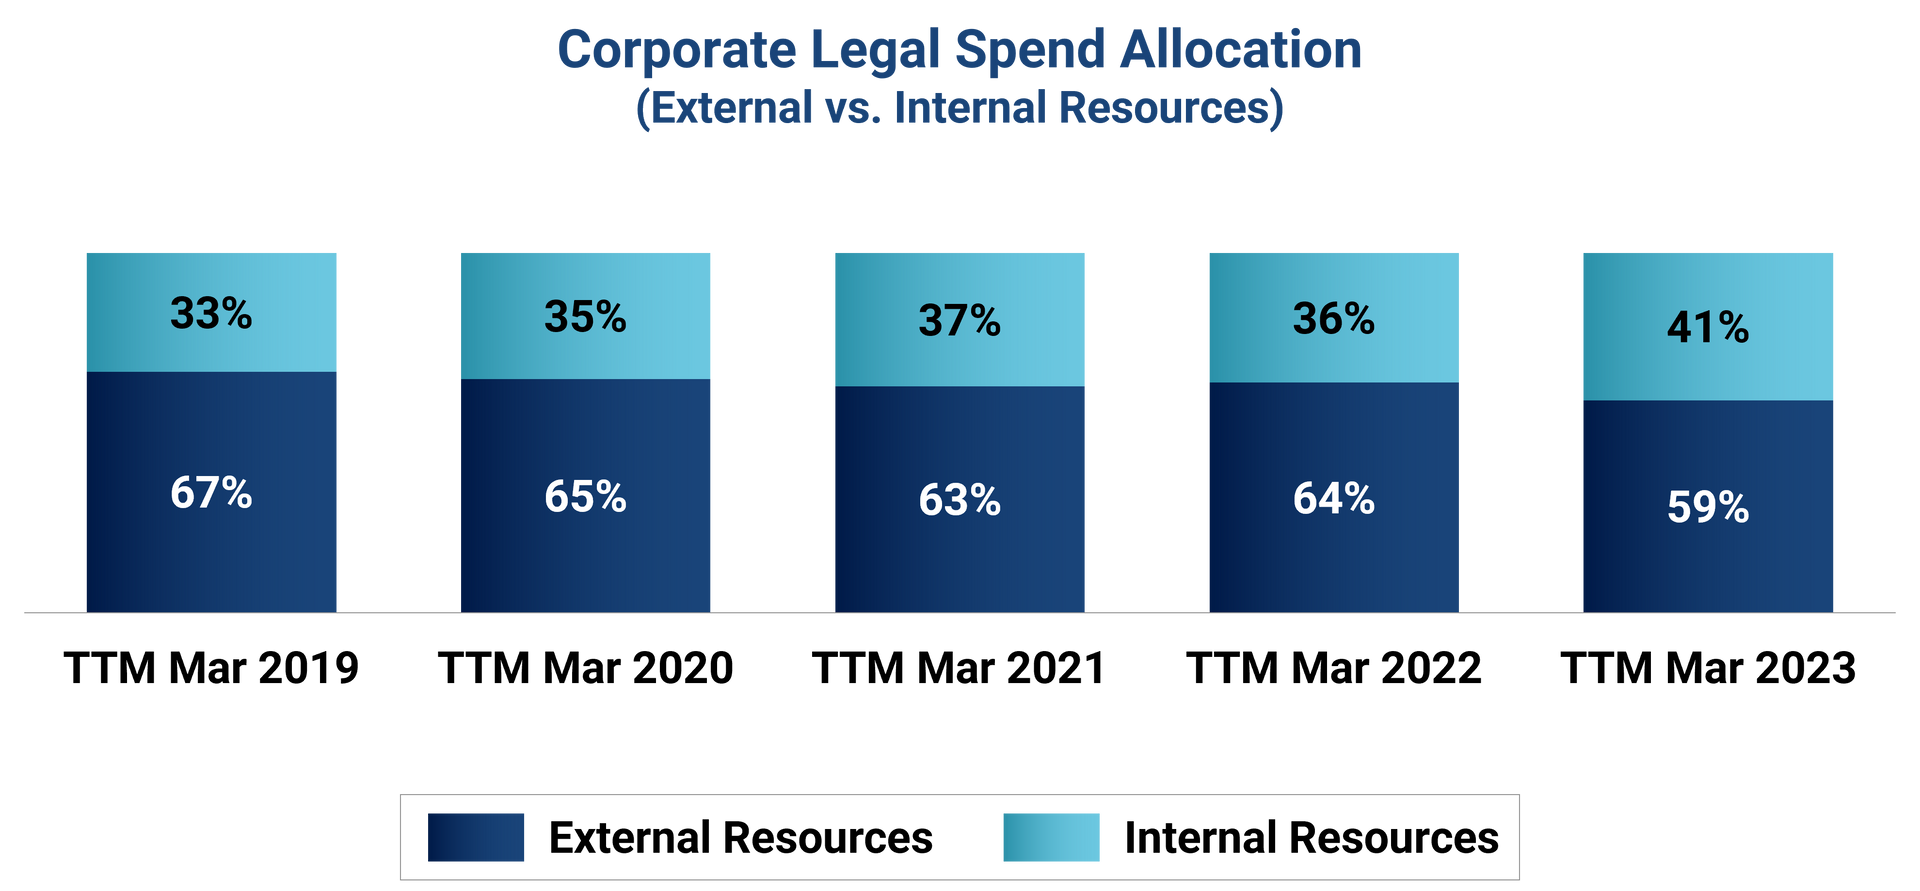 Bar chart depicting Corporate Legal Spend Allocation (External vs. Internal Resources) from 2019-2023